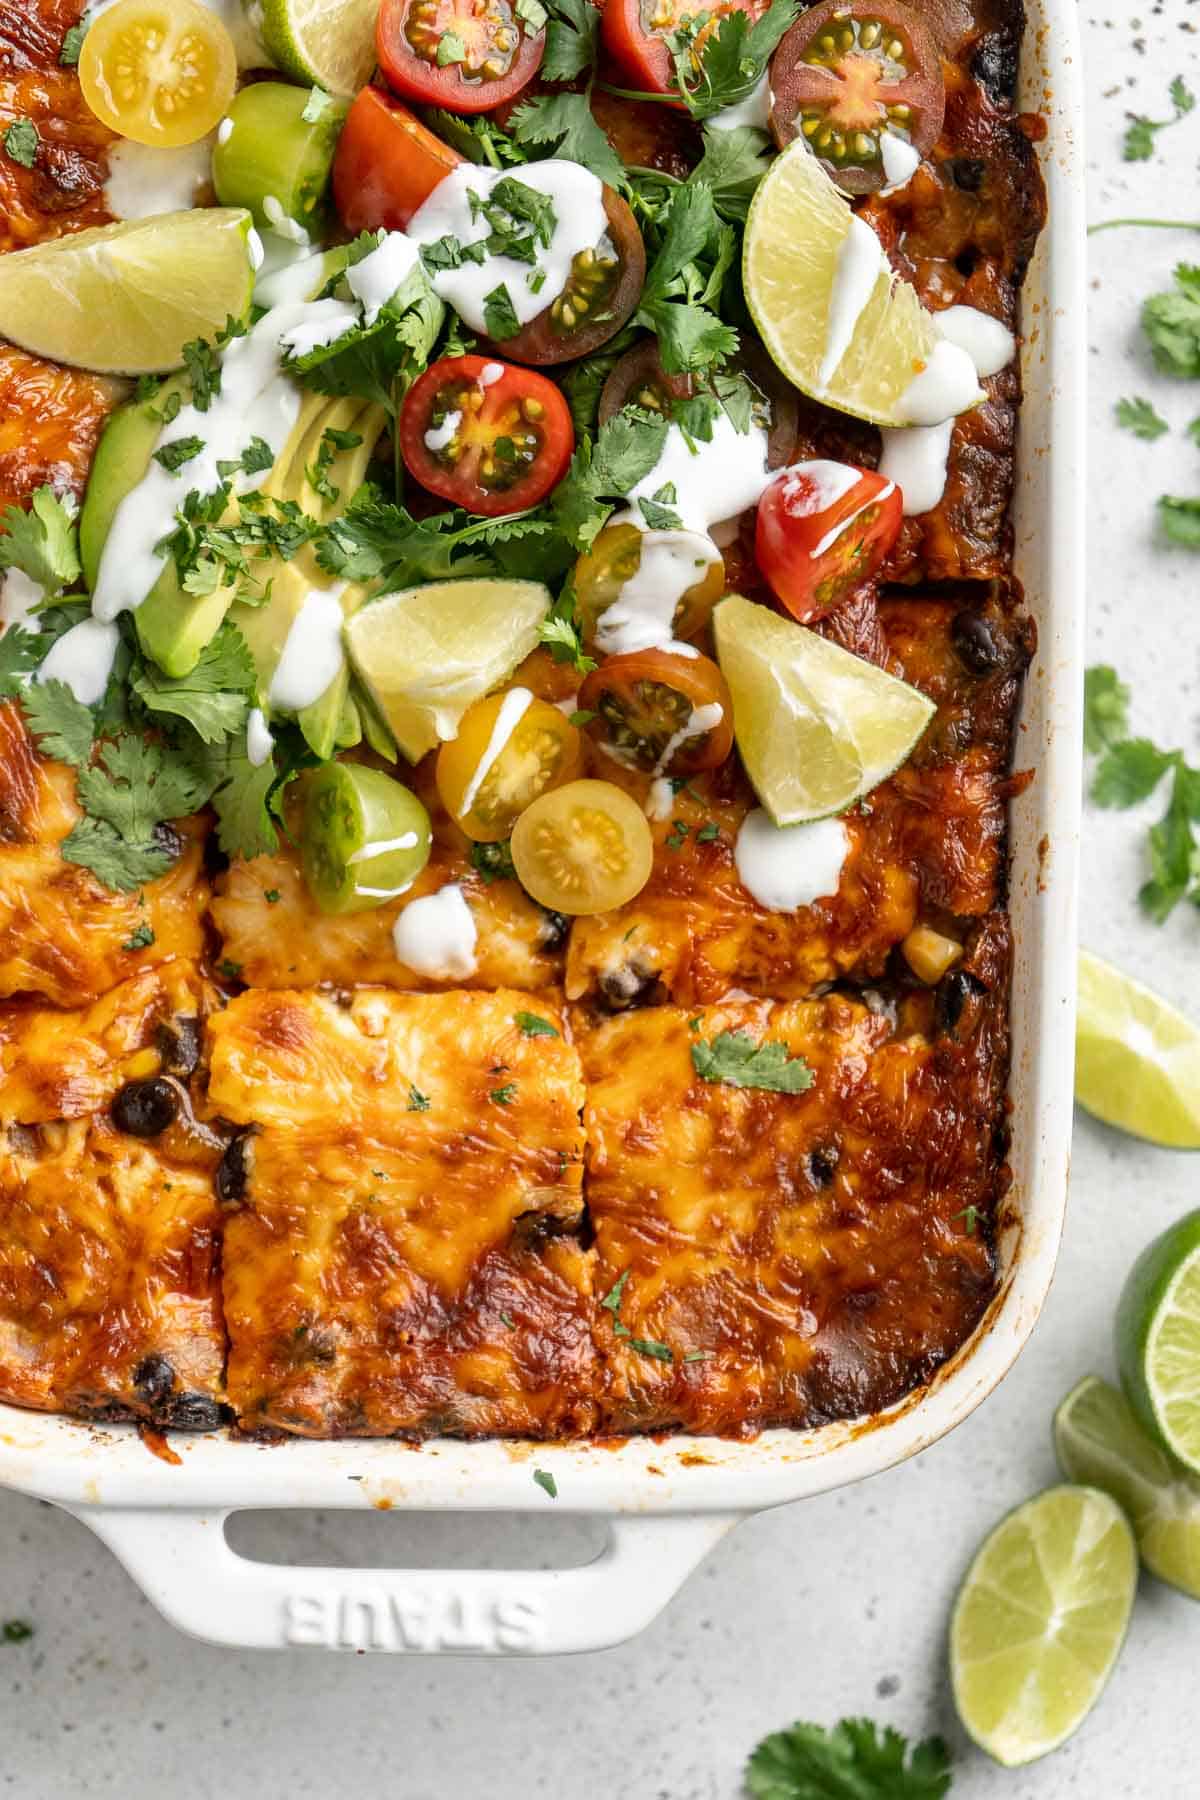 Chicken Enchilada Casserole is cheesy, saucy, and packed with layers of enchilada classics like chicken and beans, tortillas, and cheese. A family favorite! | aheadofthyme.com